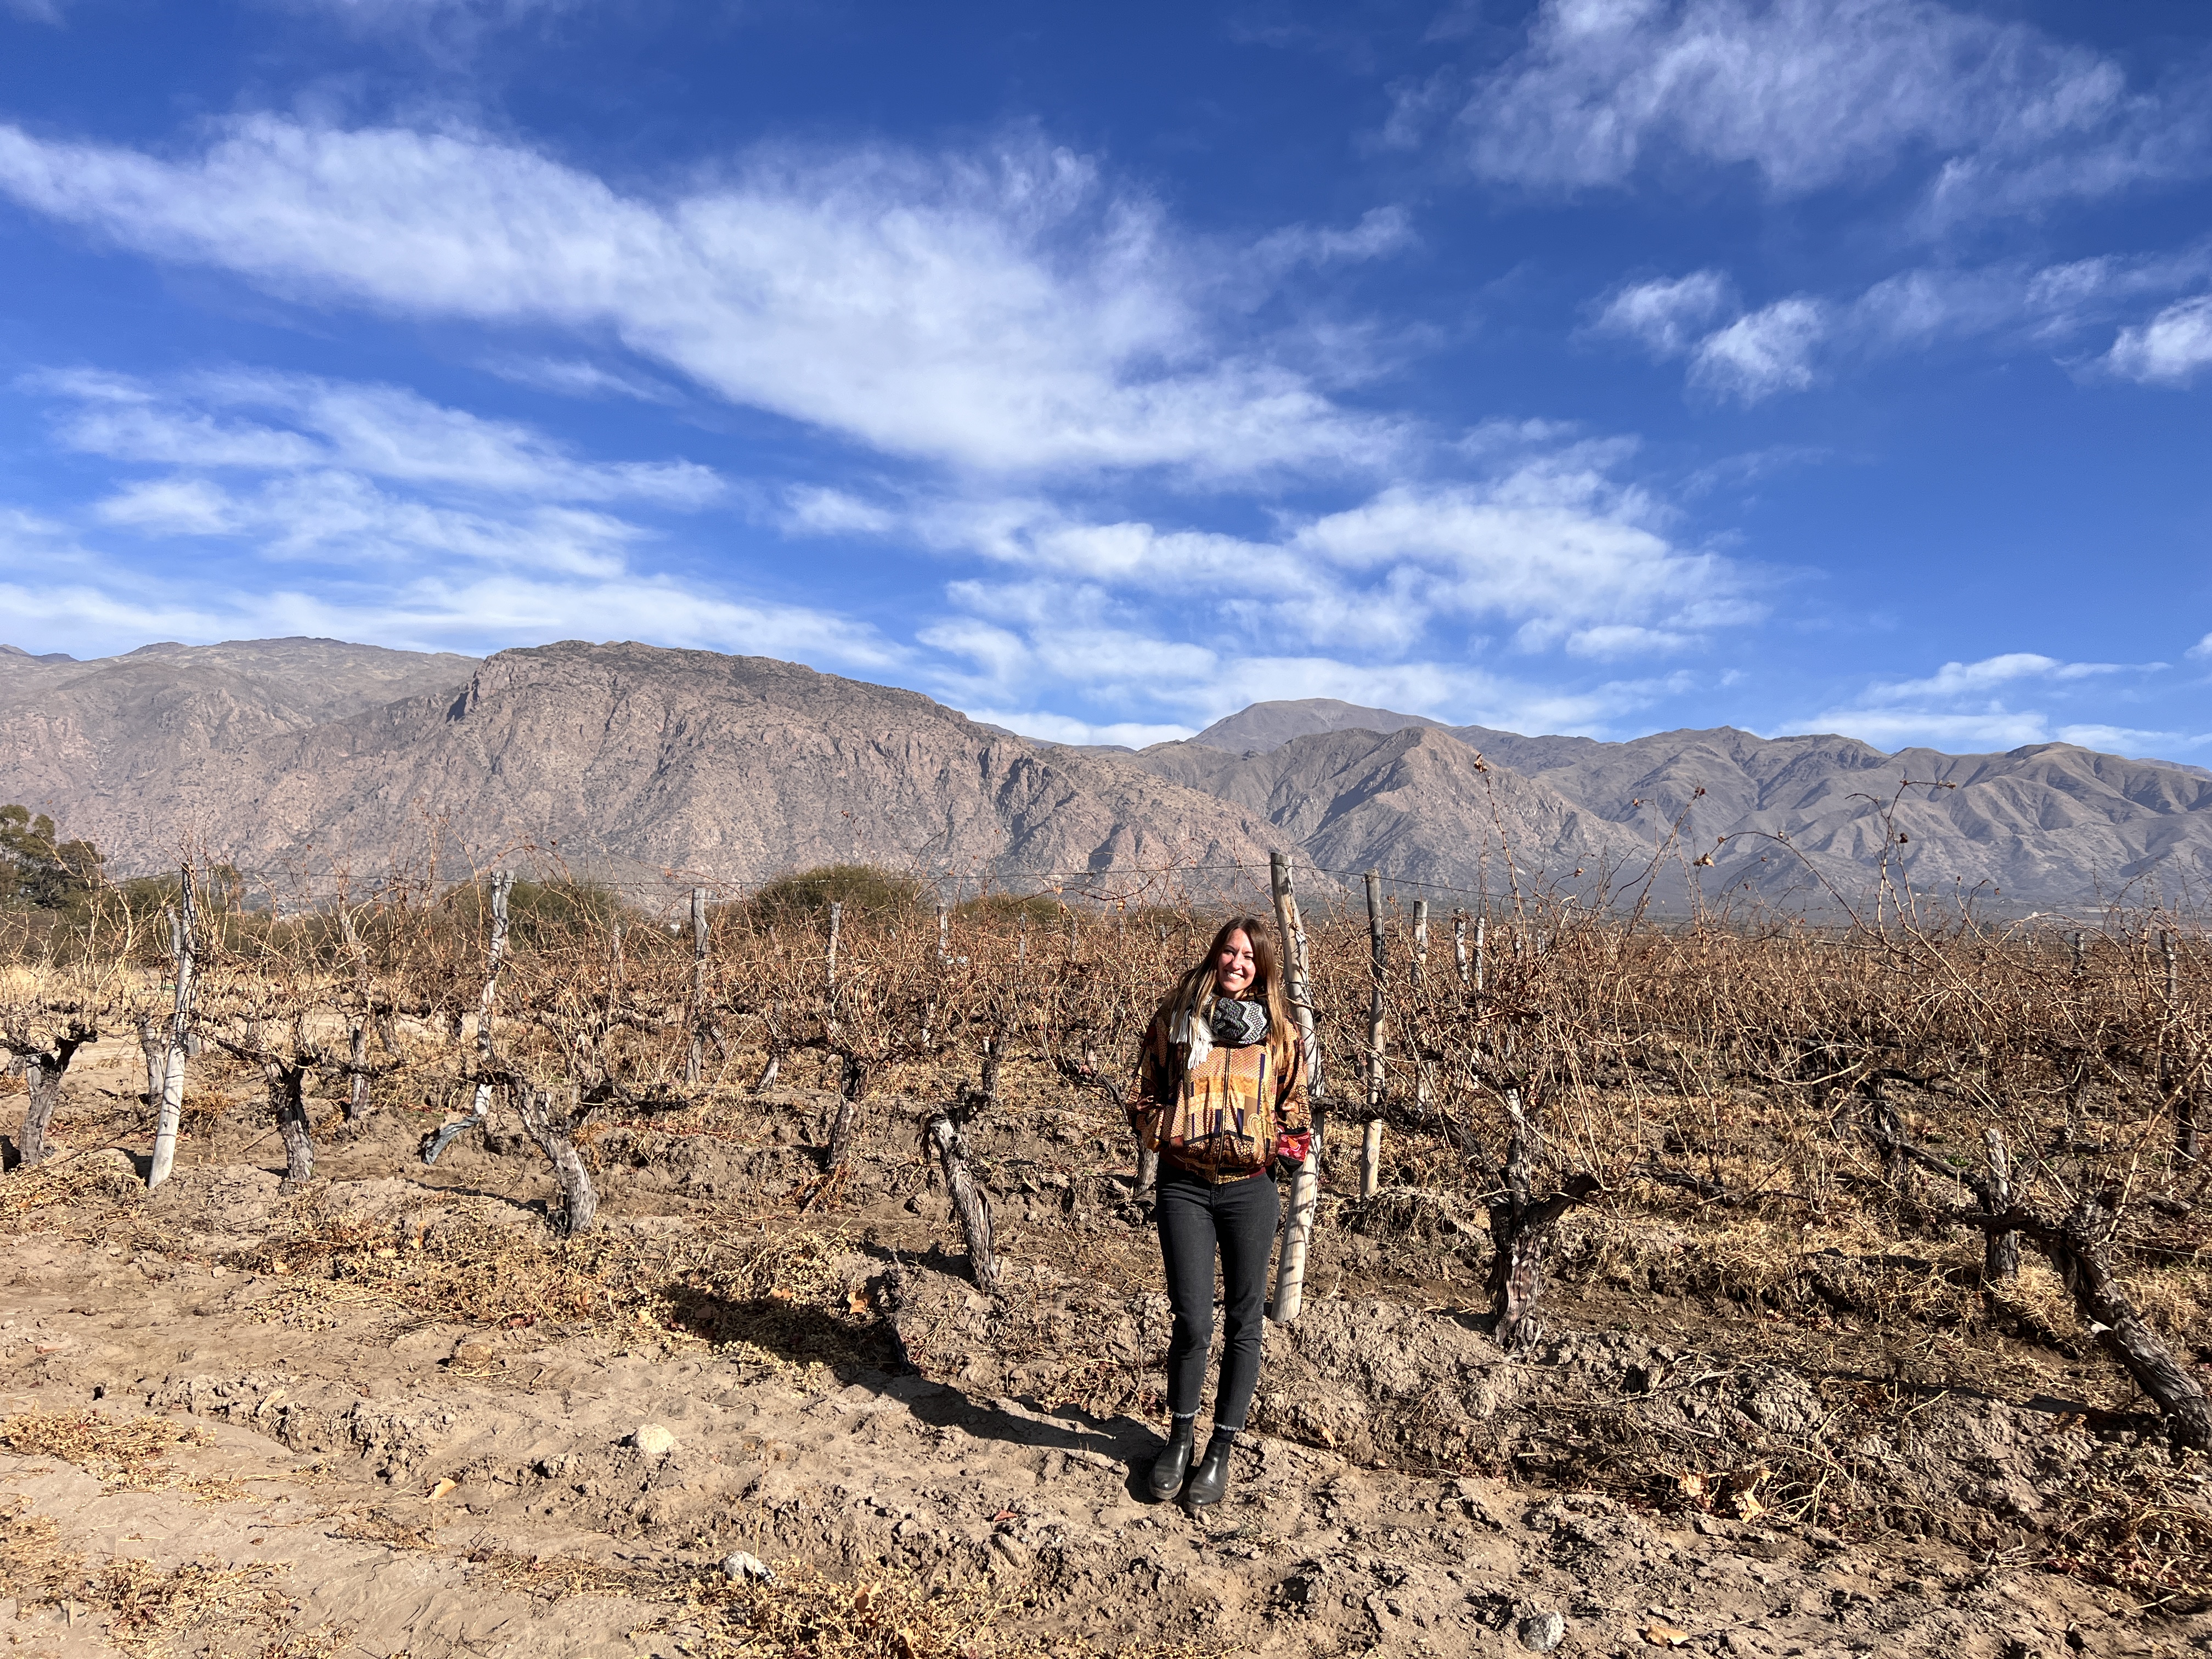 Nicki stands in front of a vineyard. It is winter so the vines and leaves are all dead. There are mountains in the background with a blue sky and several clouds.